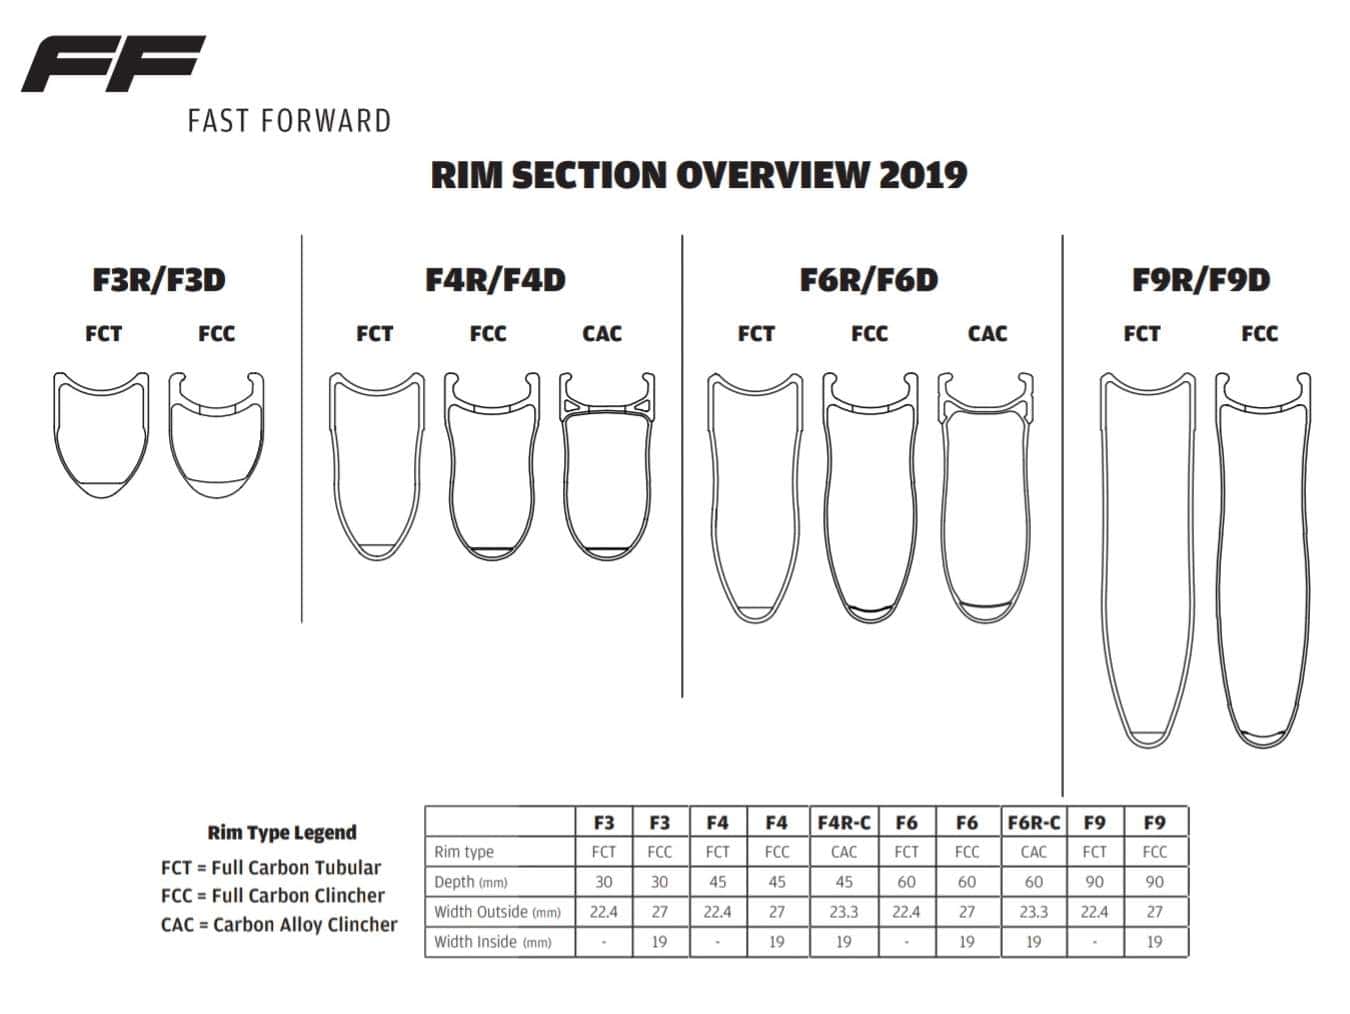 FFWD rim section overview